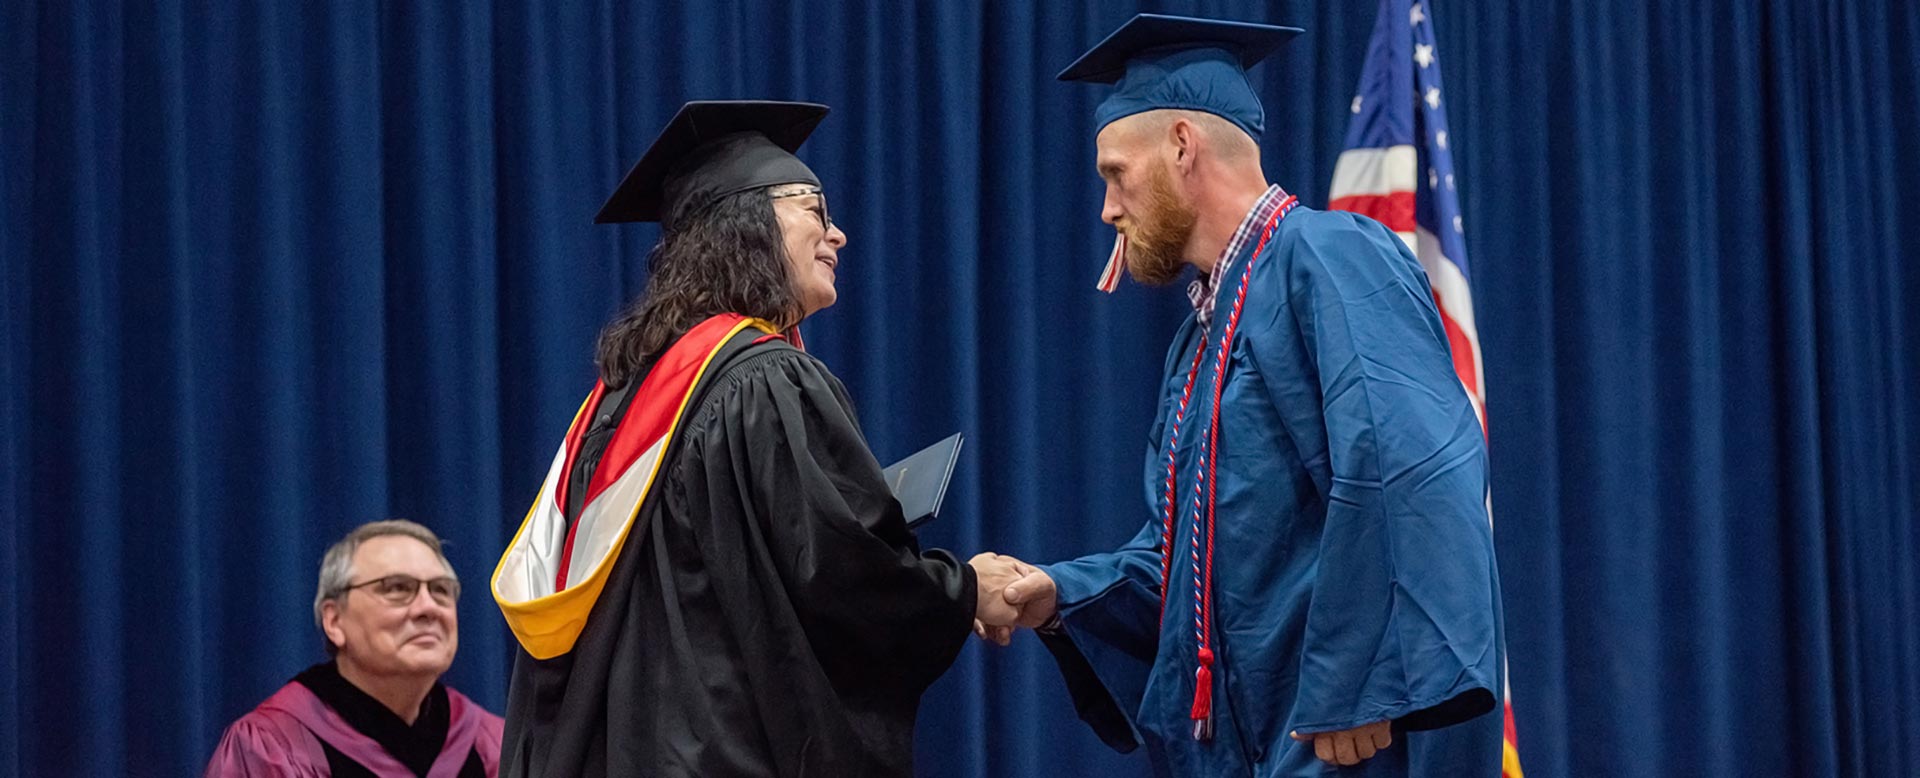 Veteran shaking the president's hand during SWCC graduation